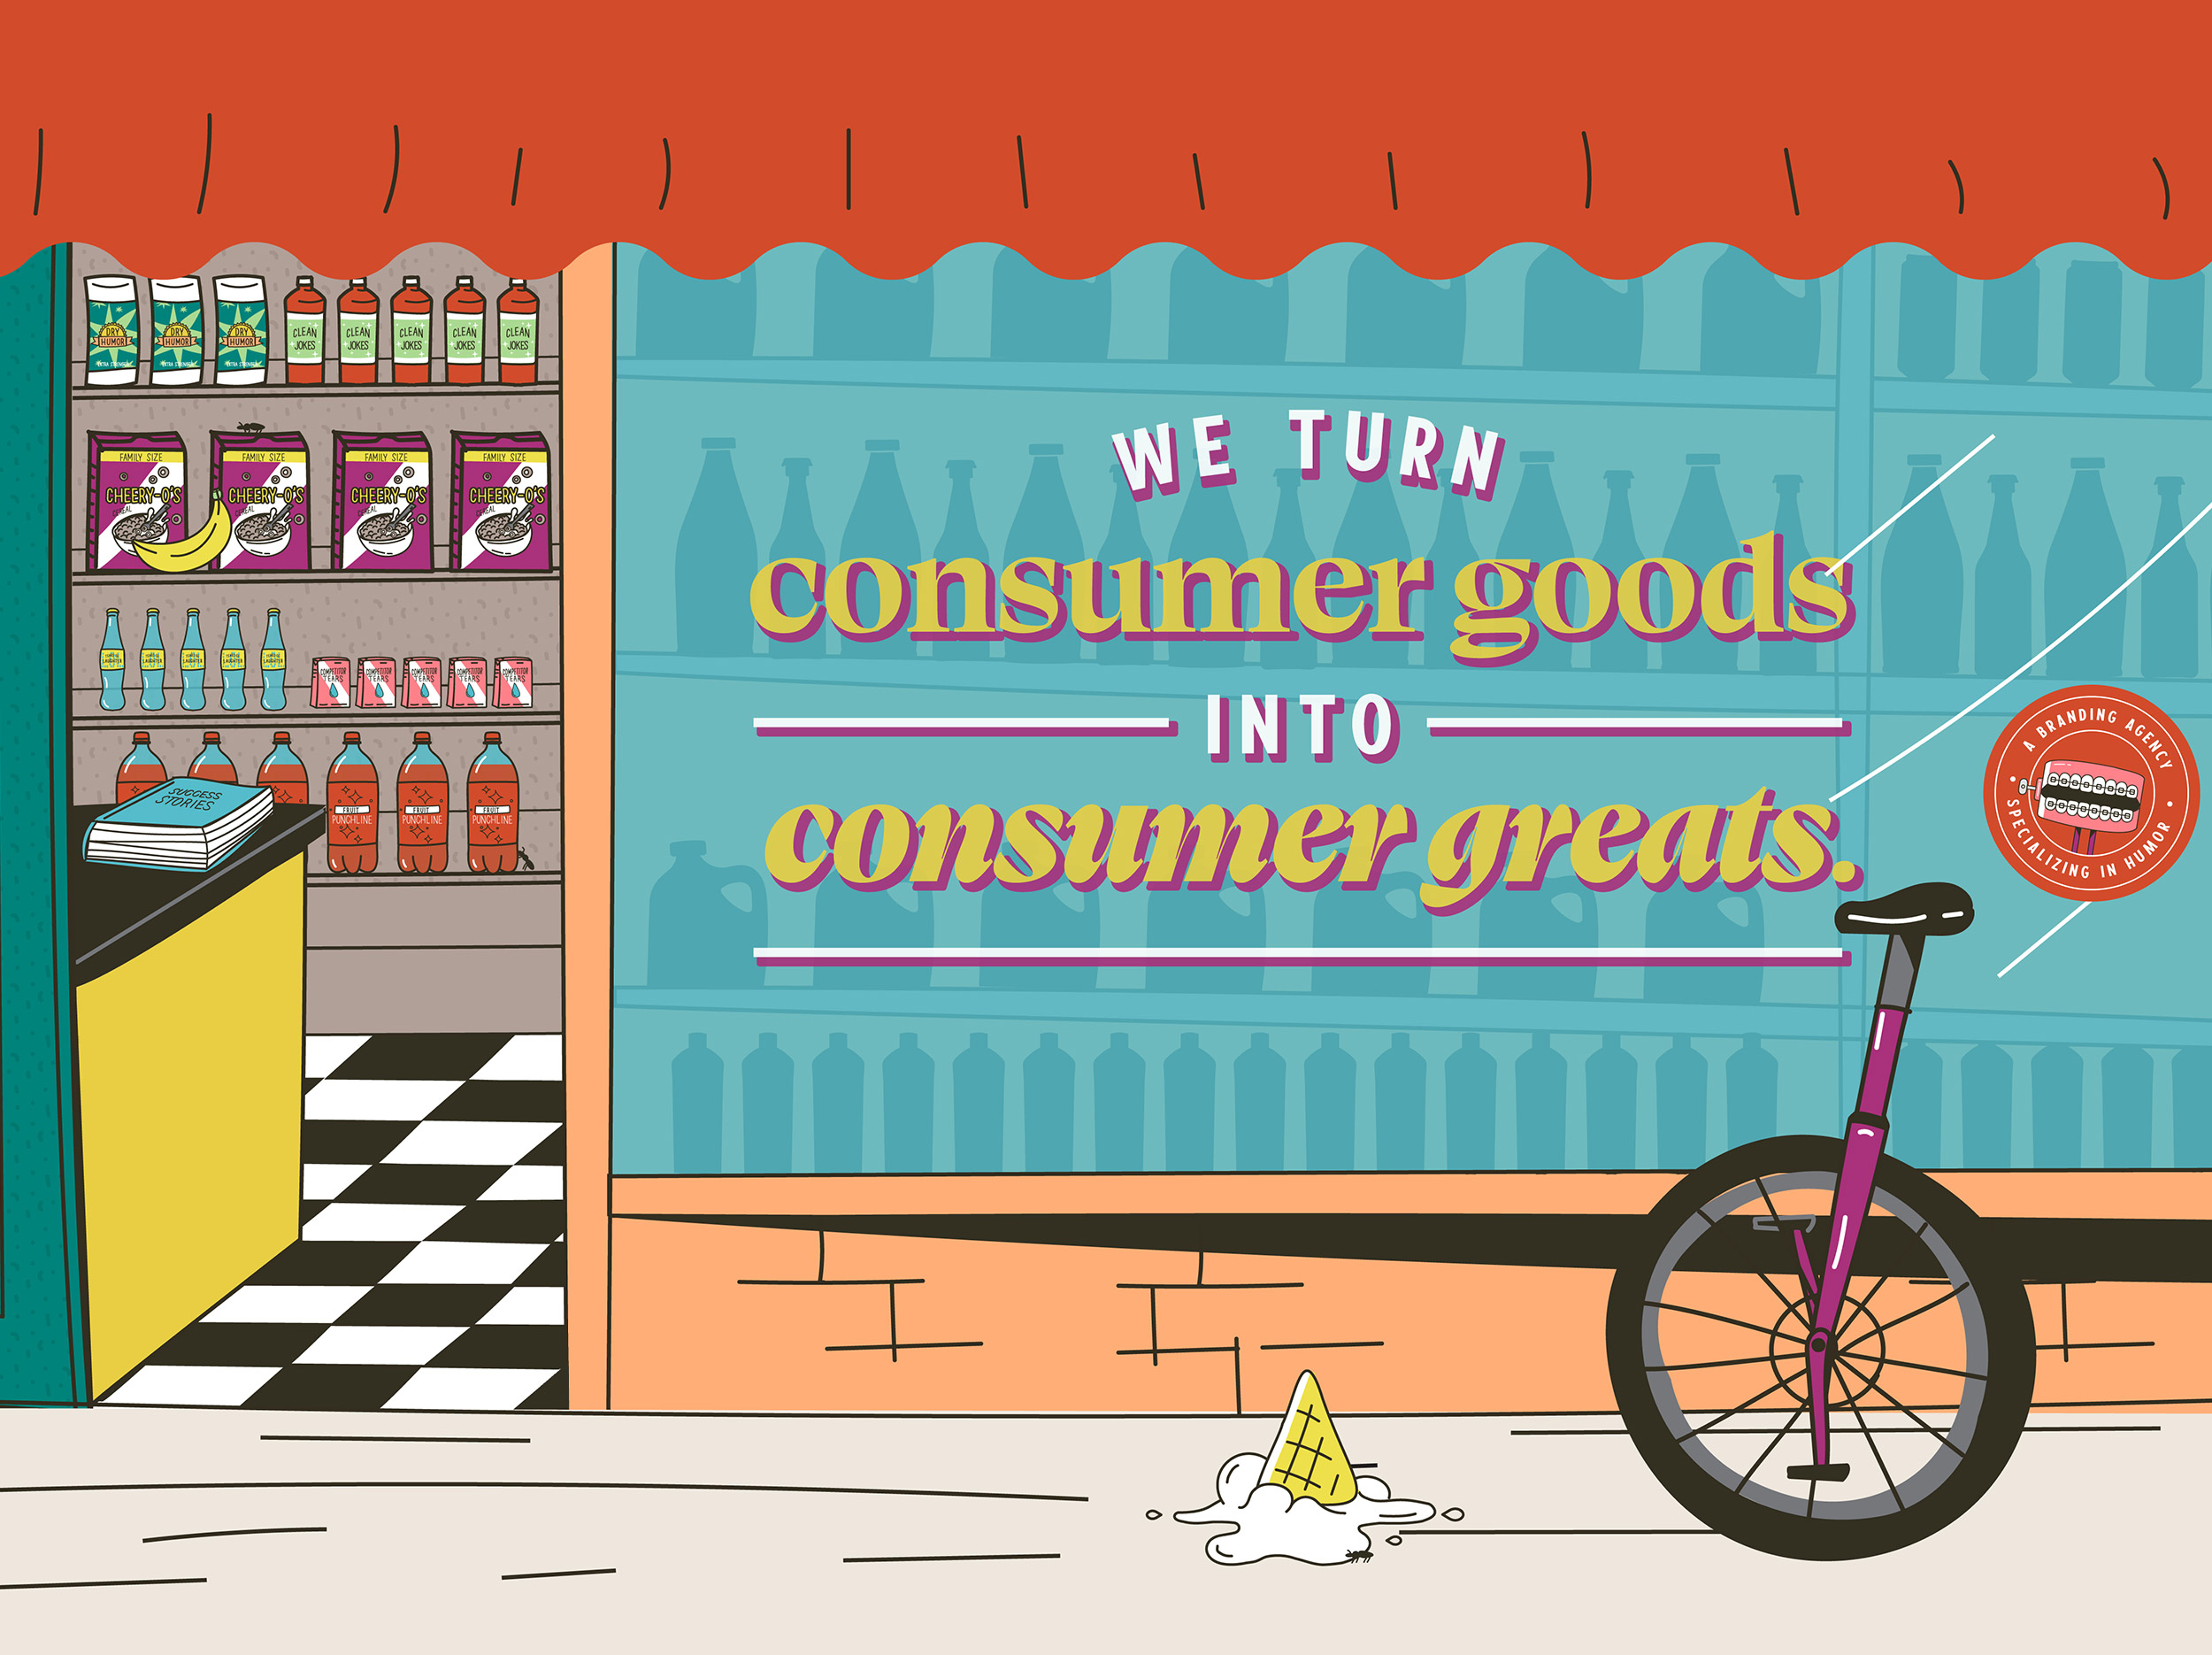 Obedient | Humor Branding Agency. Sorry, we're fresh out of Ordinary. Illustration of a Corner Store full of success stories... and a unicycle